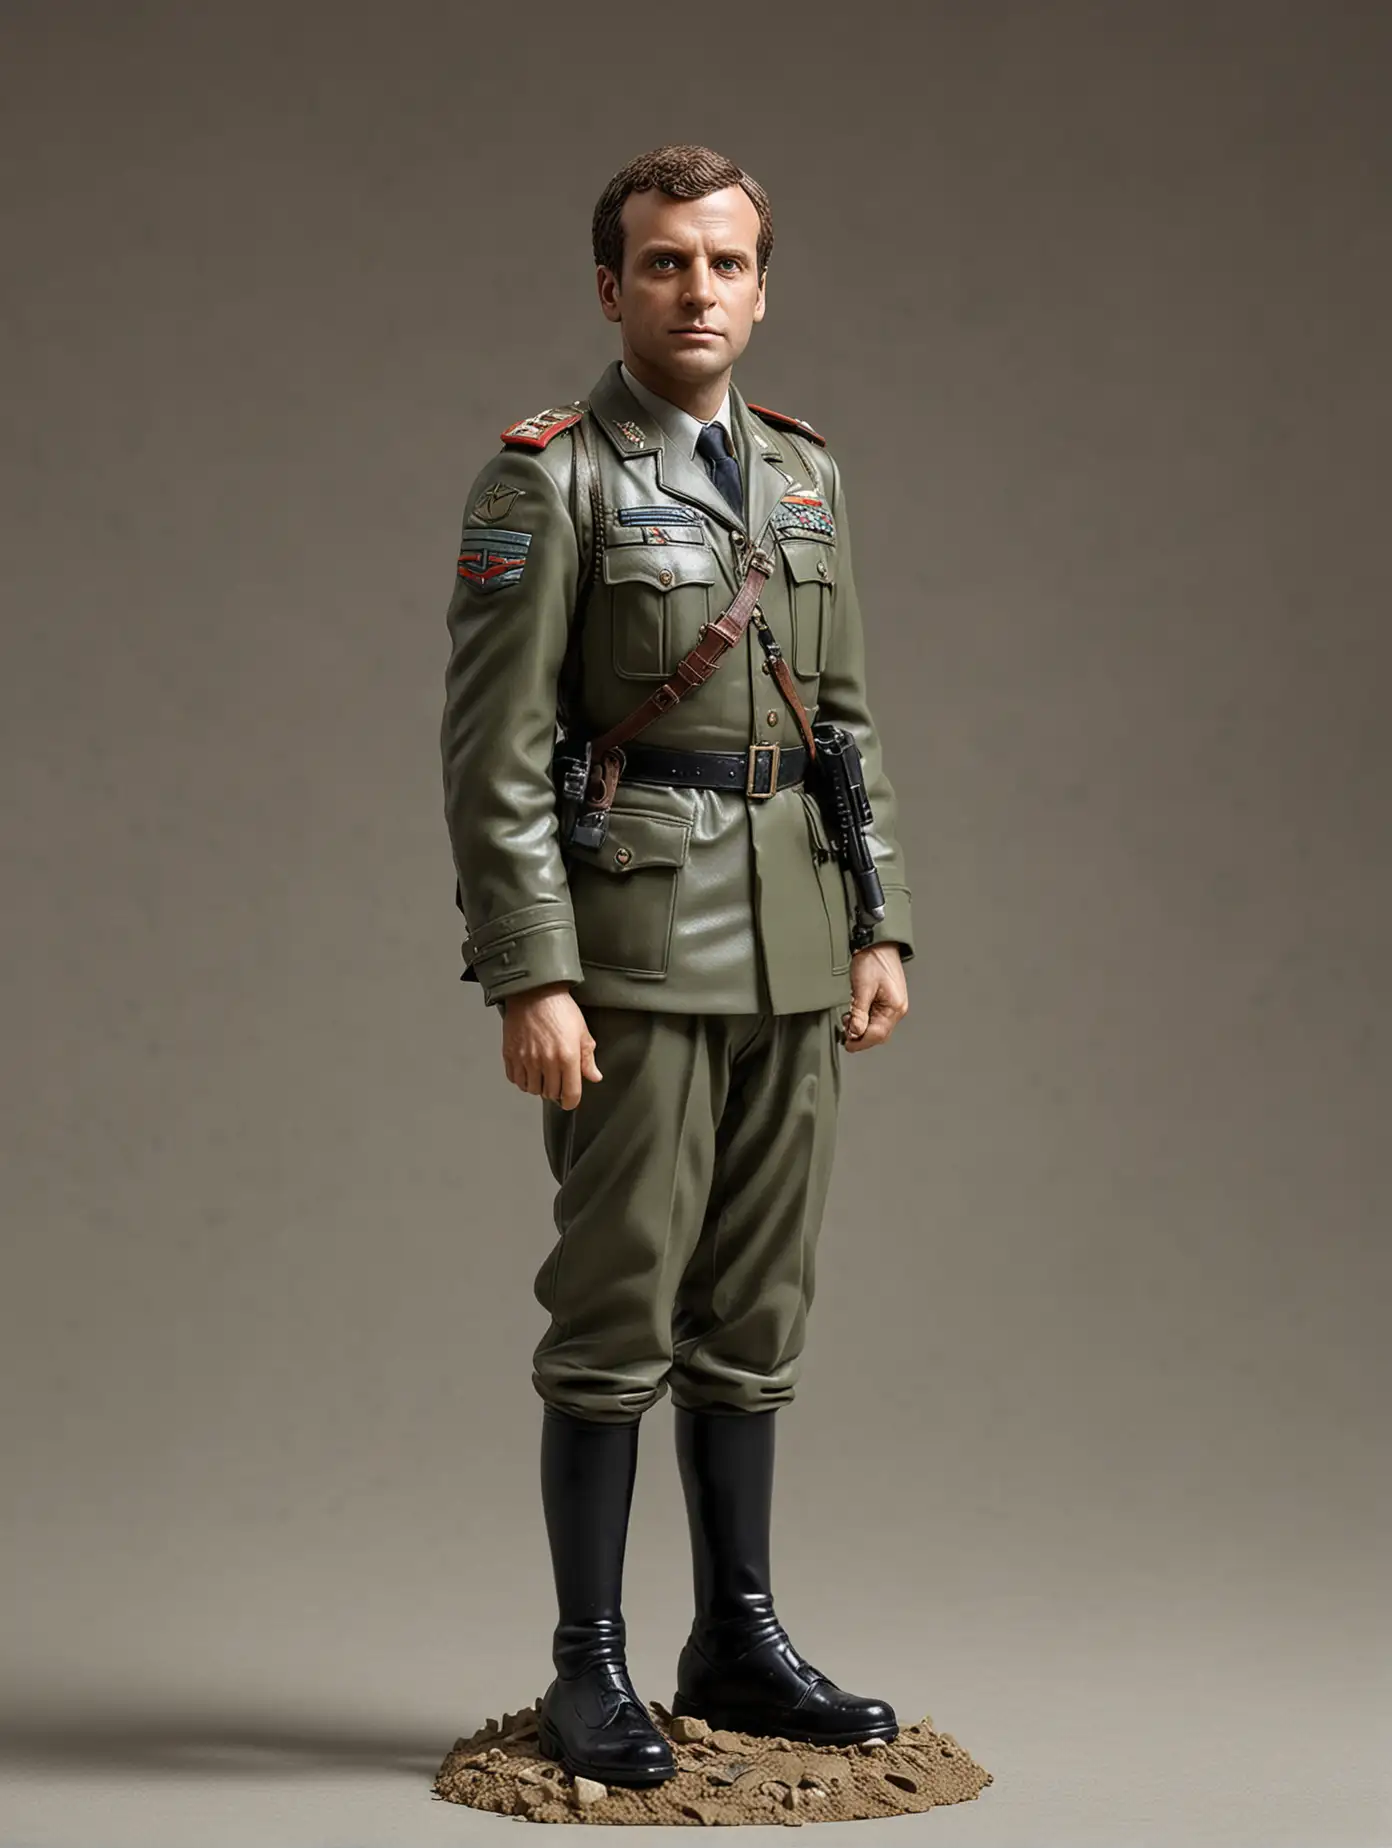 Emanuel Macron Portrayed as a Small Plastic Soldier A Captivating Photorealistic Composition